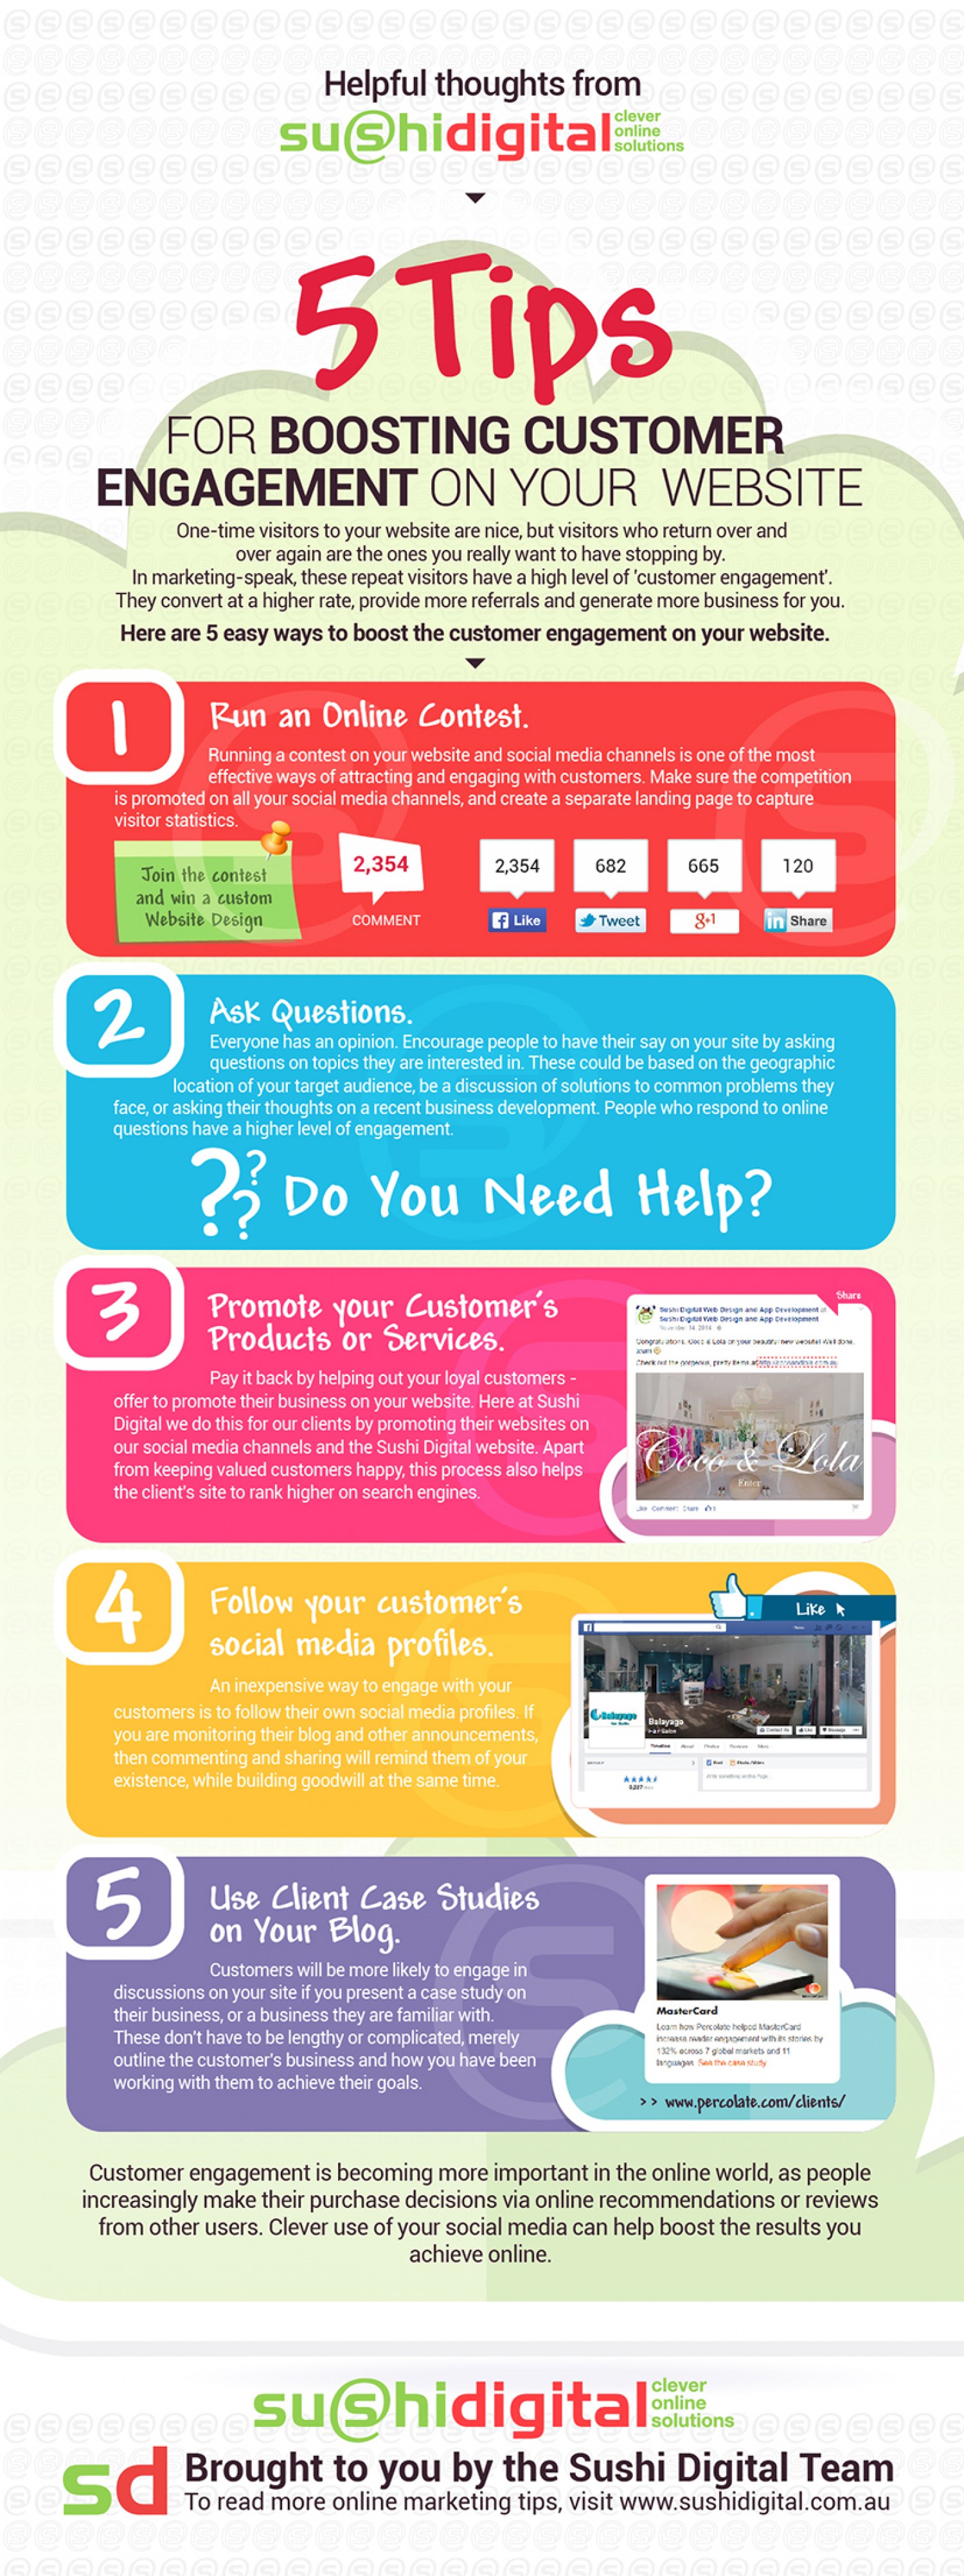 5-tips-for-boosting-customer-engagement-on-your-website_54ff3b3291a63_w1500